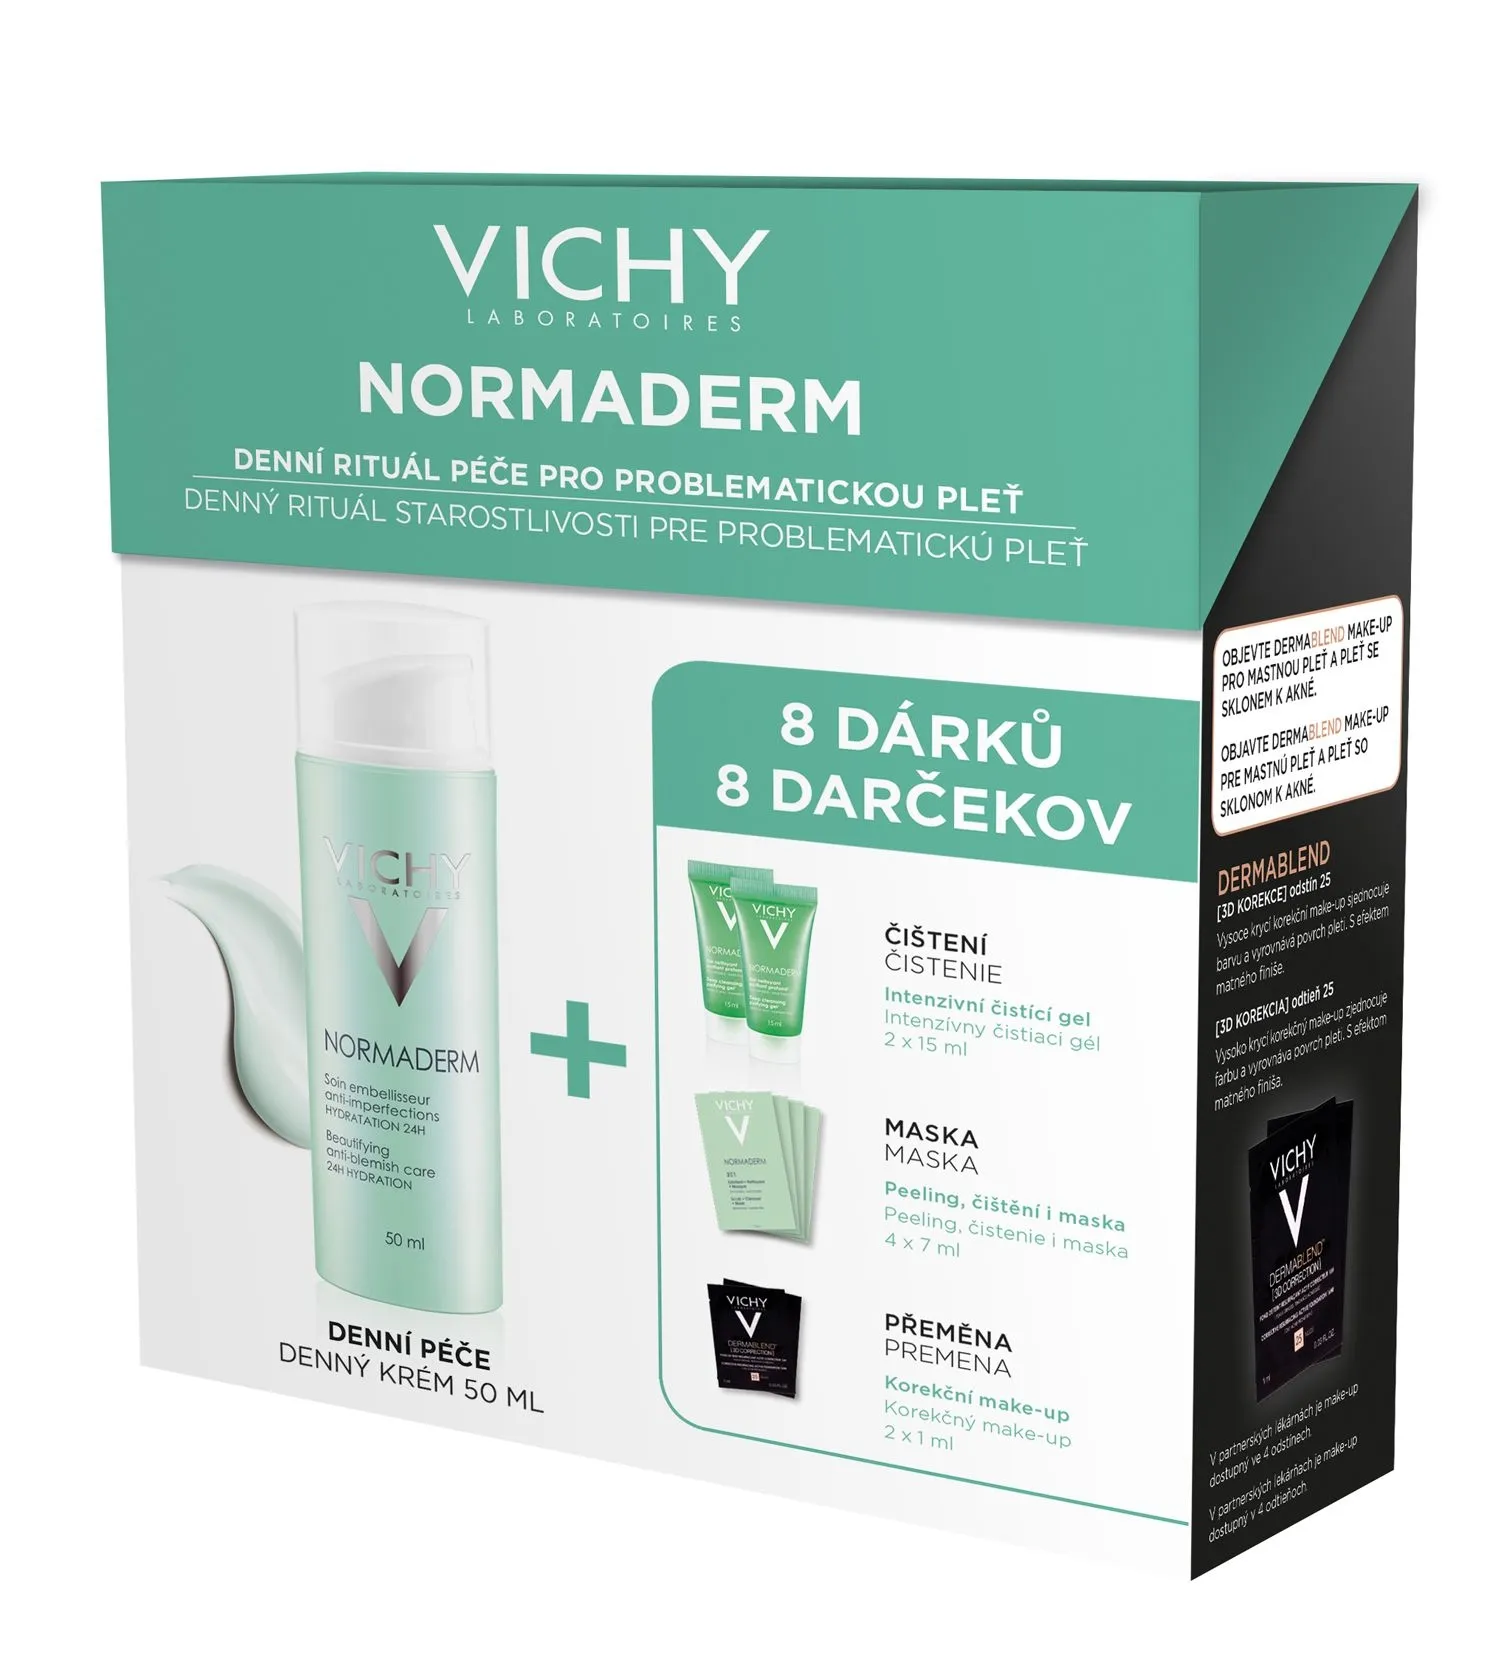 VICHY Normaderm DAY PACK 2017